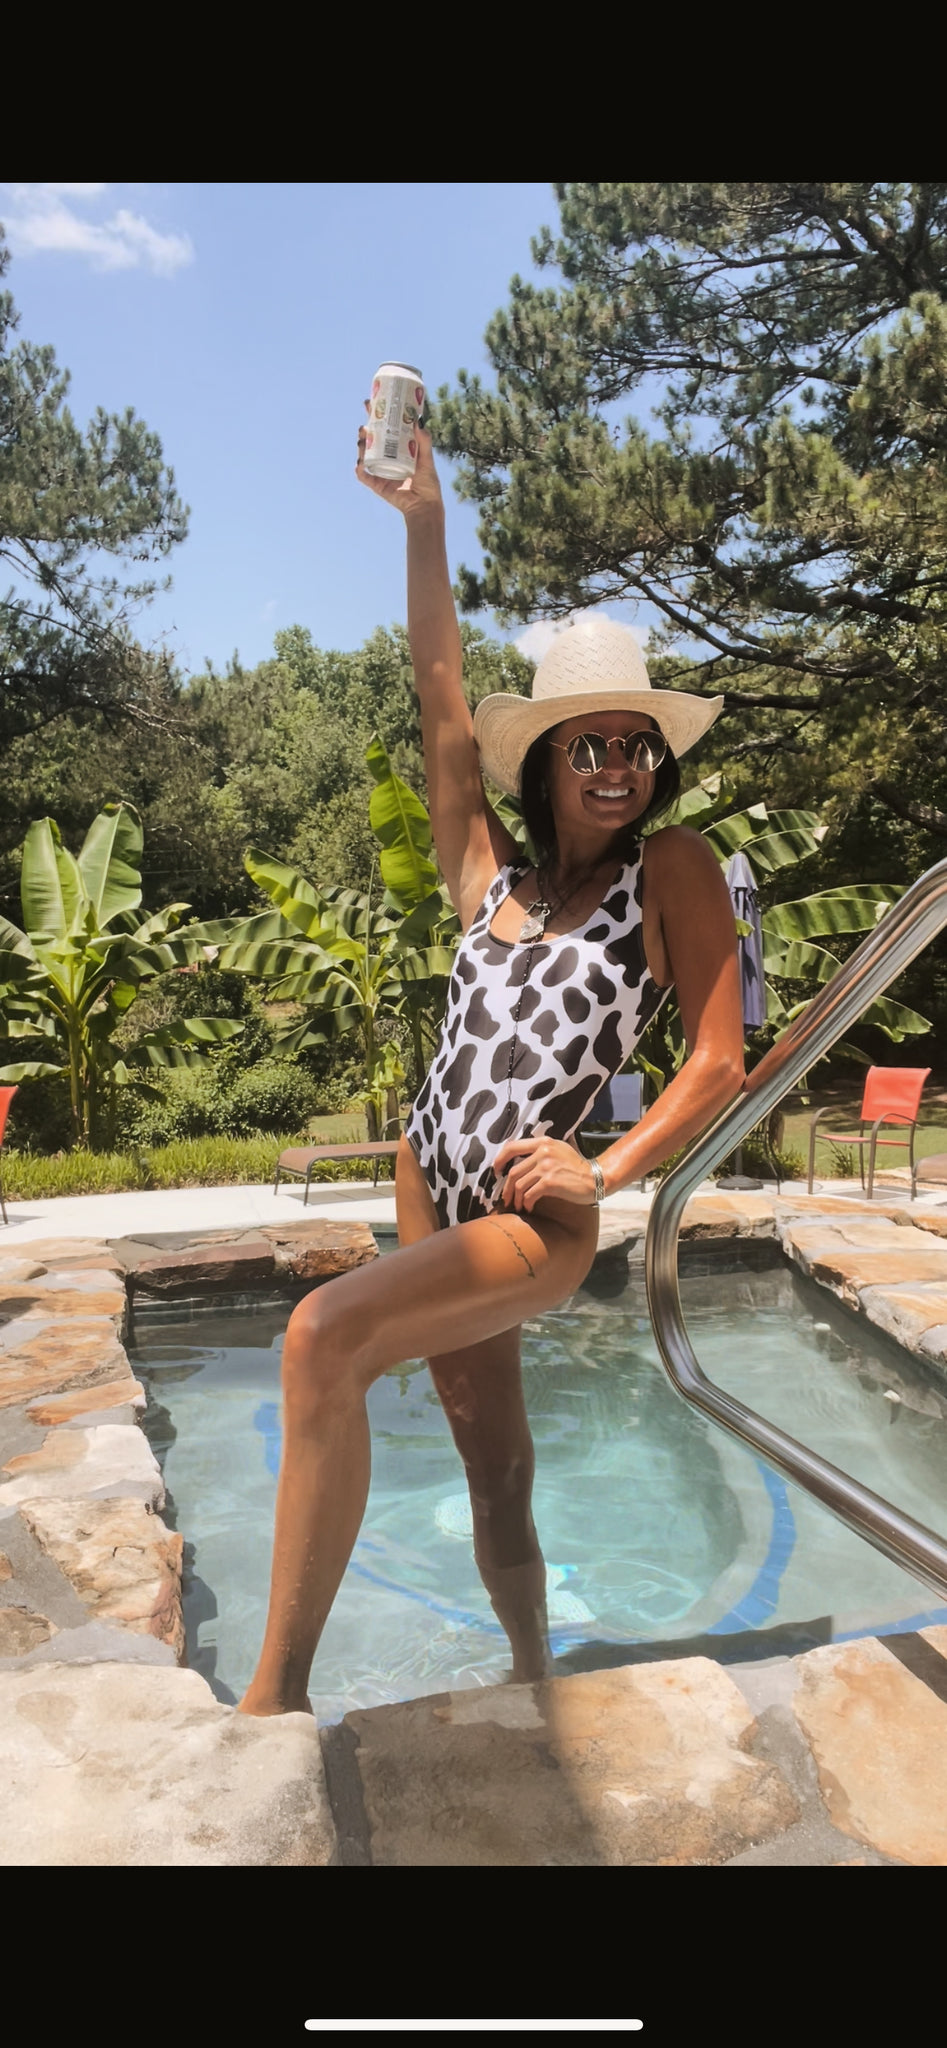 Cow Print One Piece Swimsuit